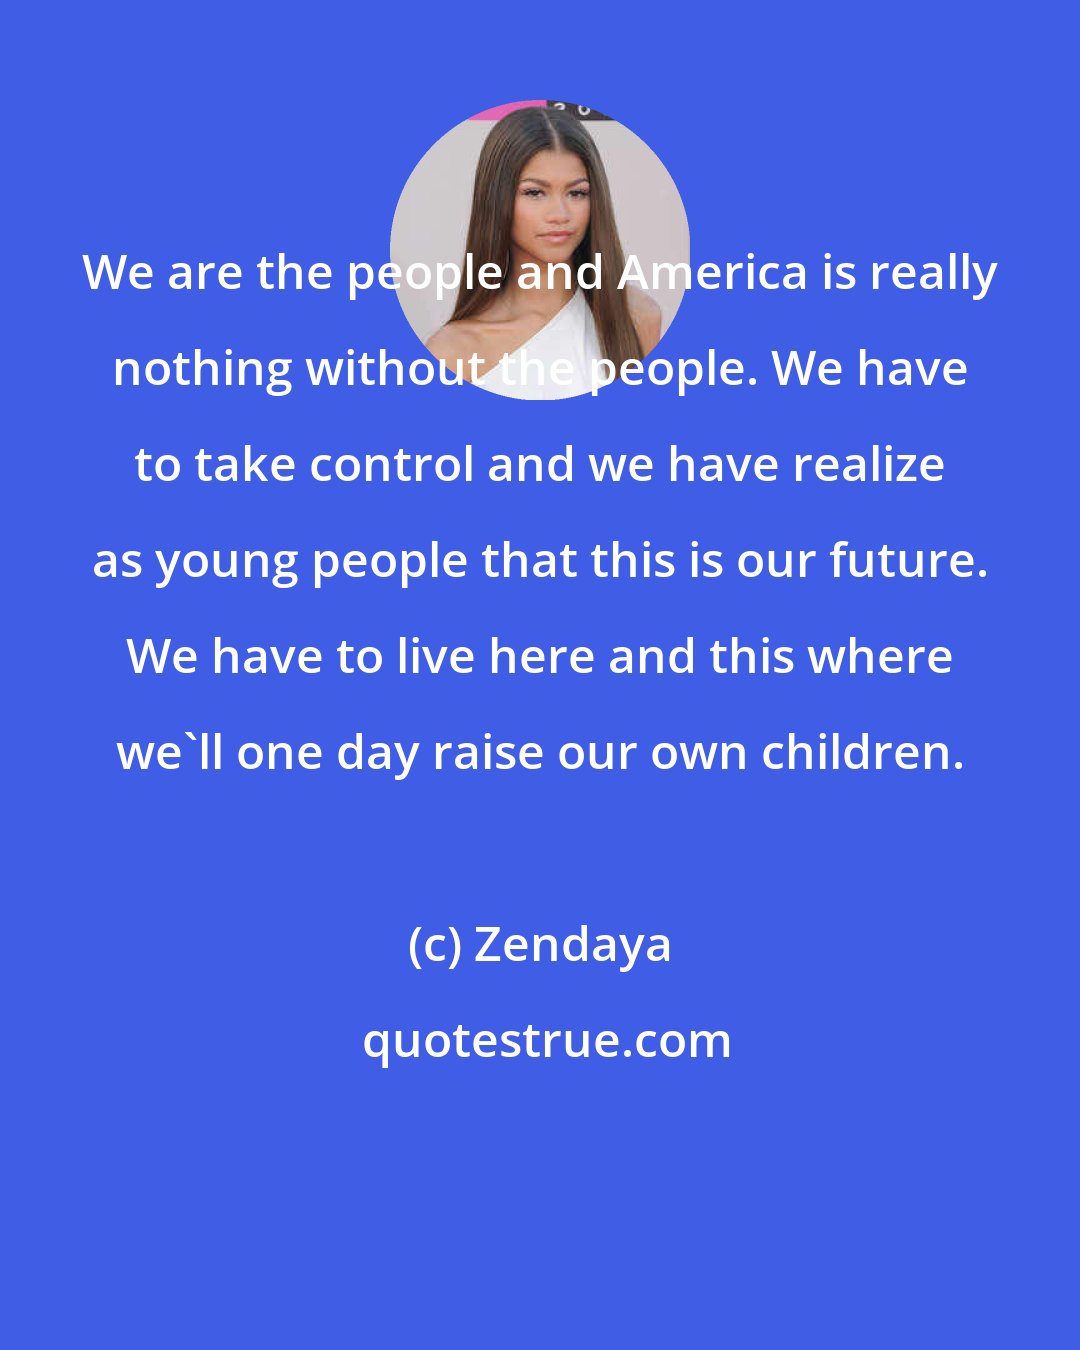 Zendaya: We are the people and America is really nothing without the people. We have to take control and we have realize as young people that this is our future. We have to live here and this where we'll one day raise our own children.